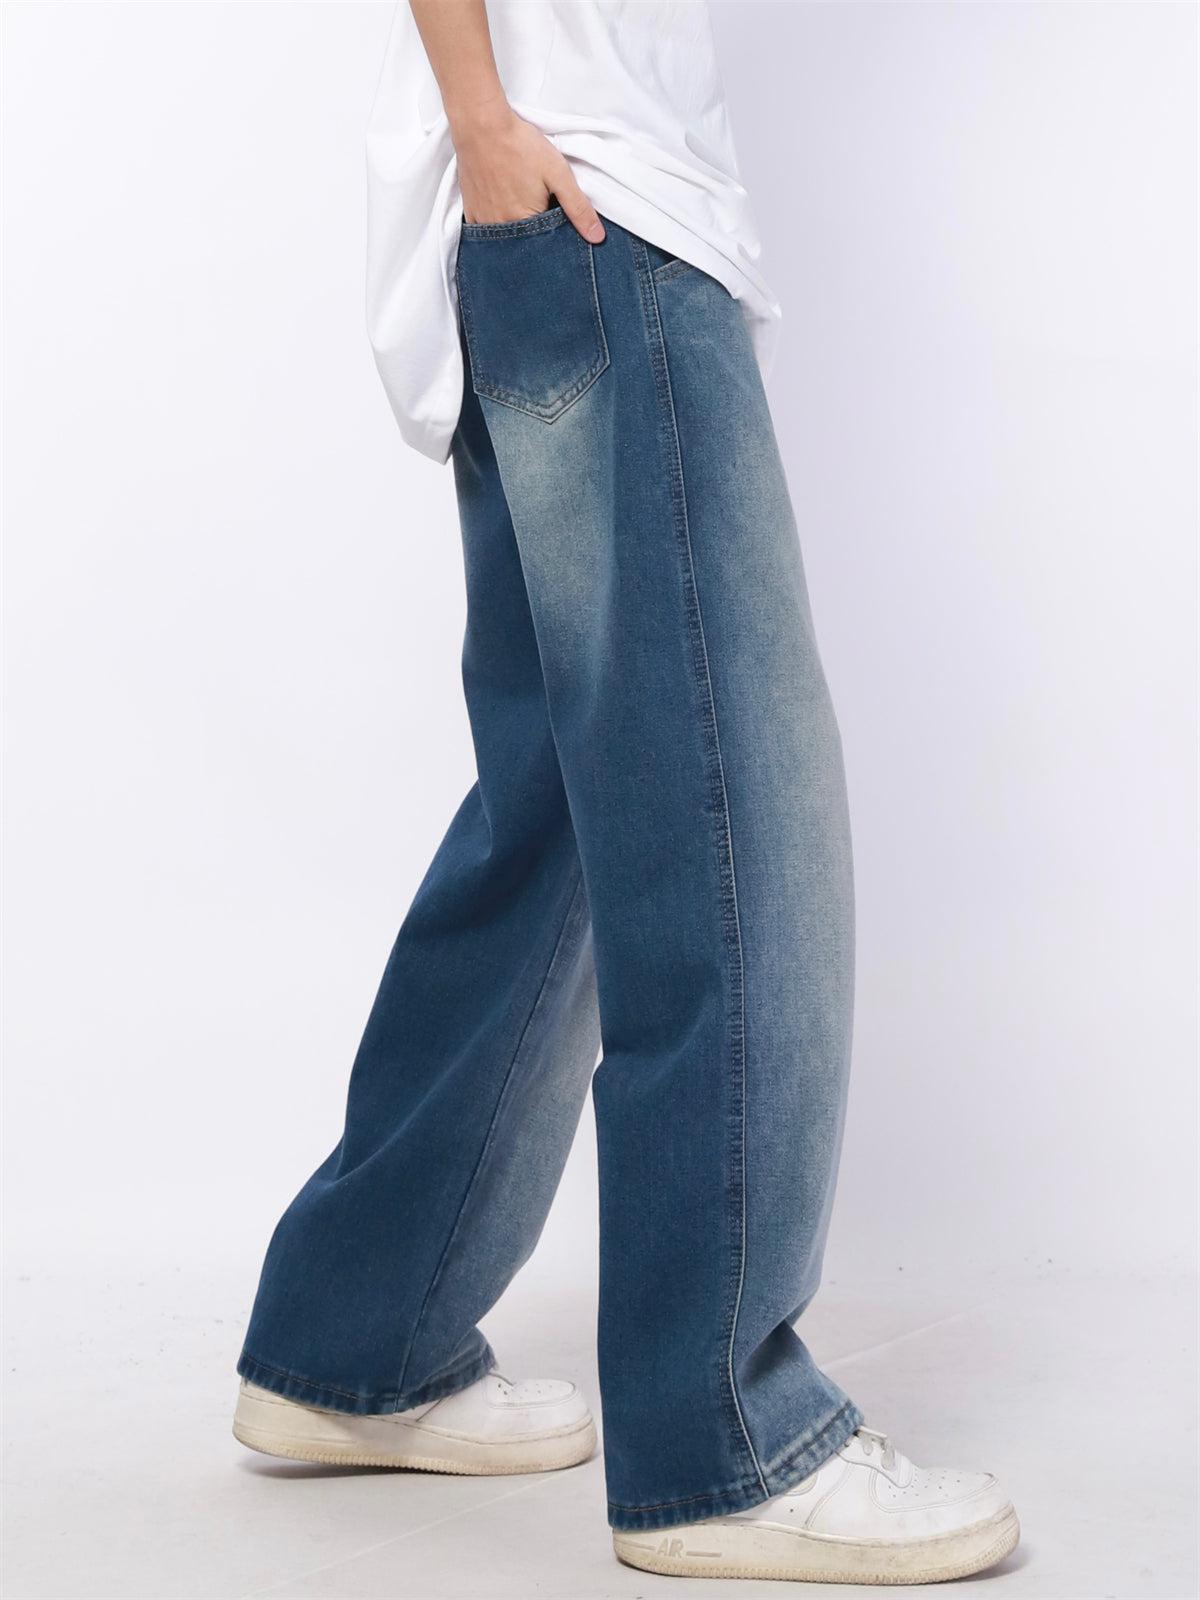 Gradient Washed Straight Jeans Korean Street Fashion Jeans By Made Extreme Shop Online at OH Vault